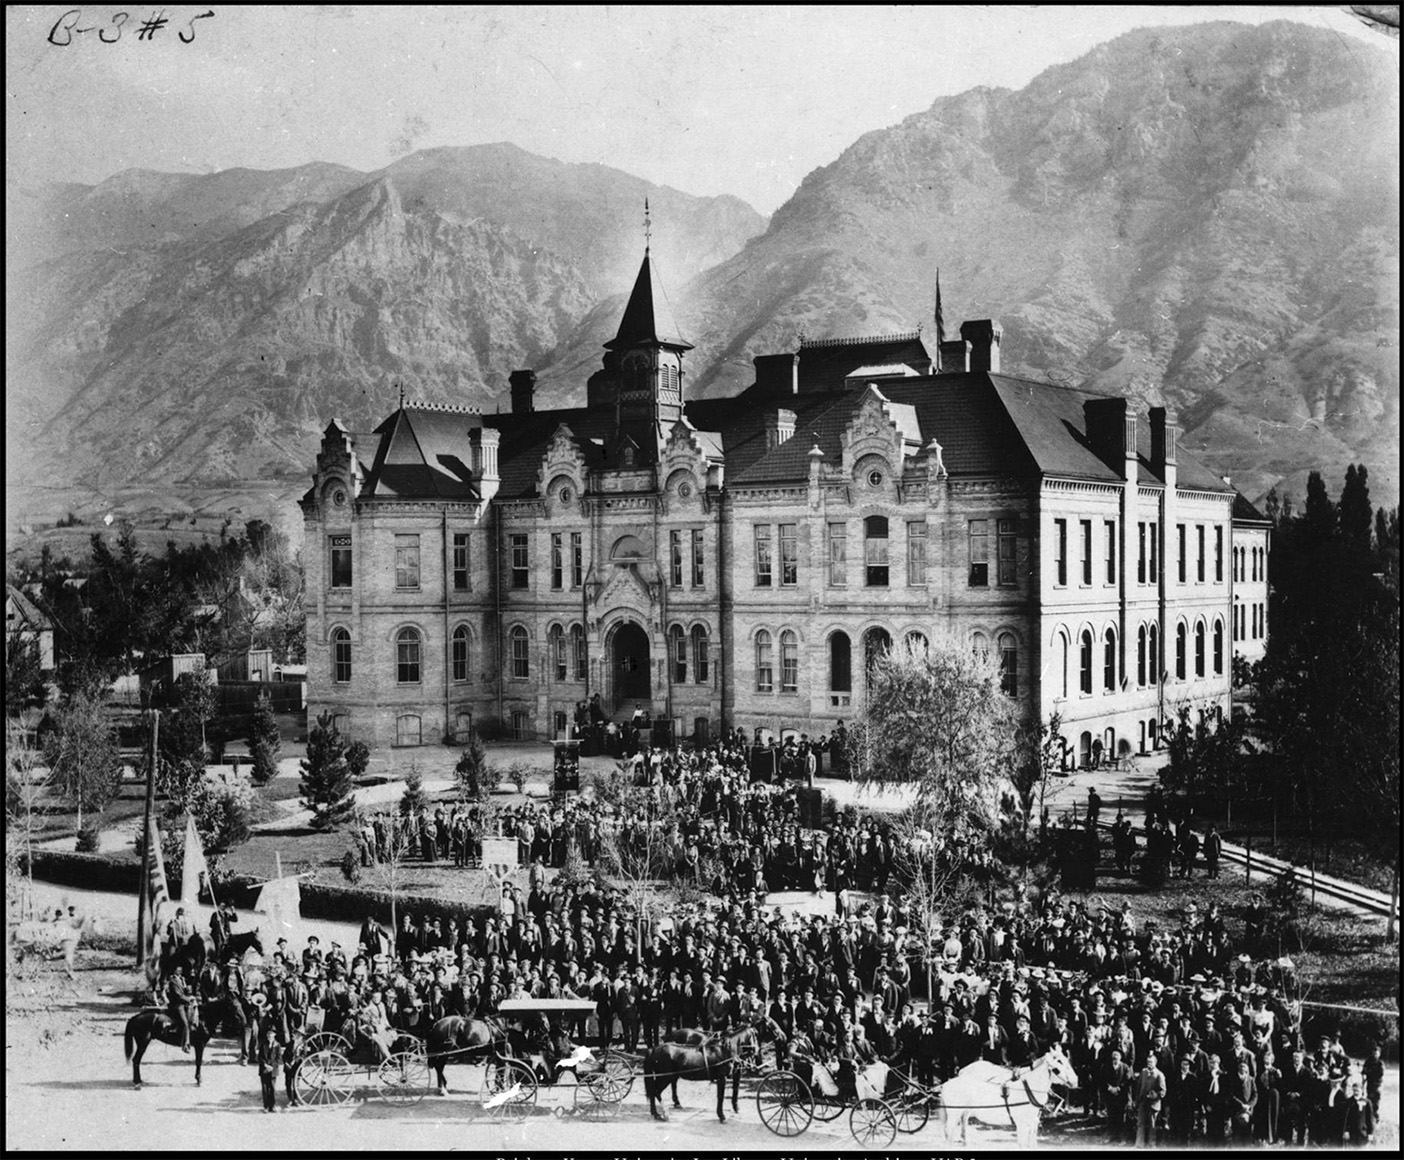 A photo of the dedication of the Brigham Young Academy Building on Jan. 4, 1892.